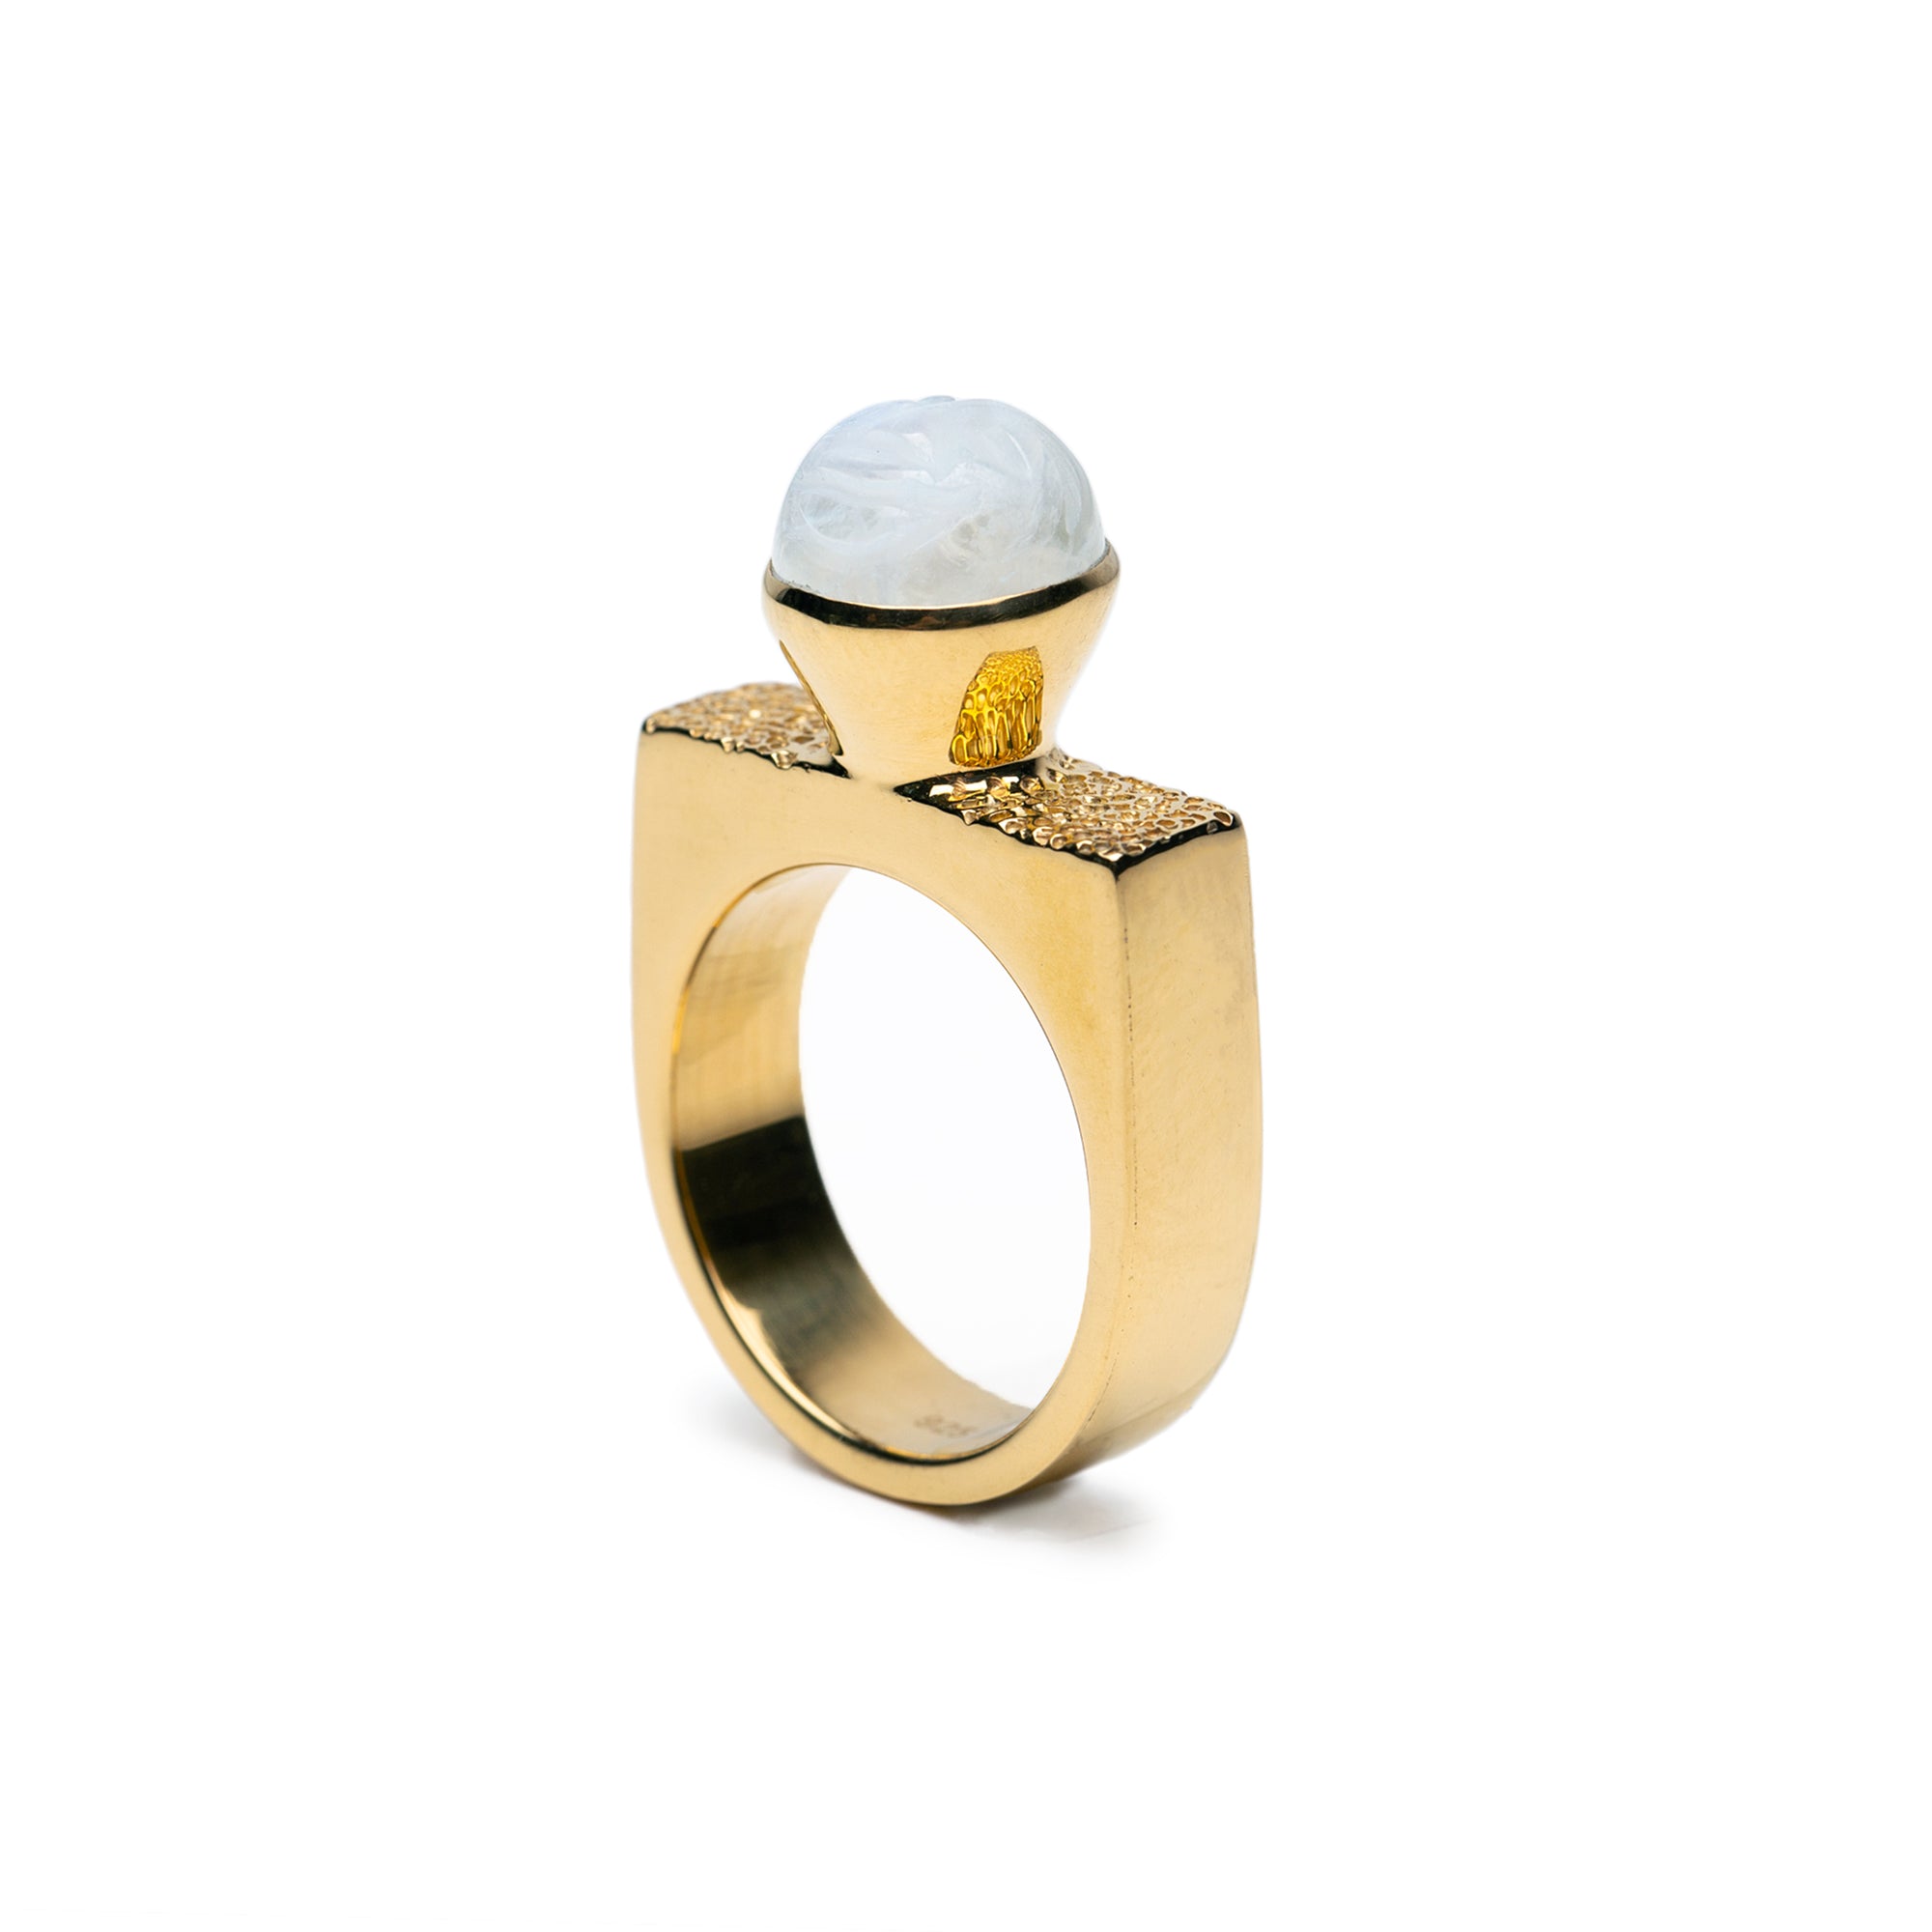 The WONDER Ring Gold Plated - Limited Edition